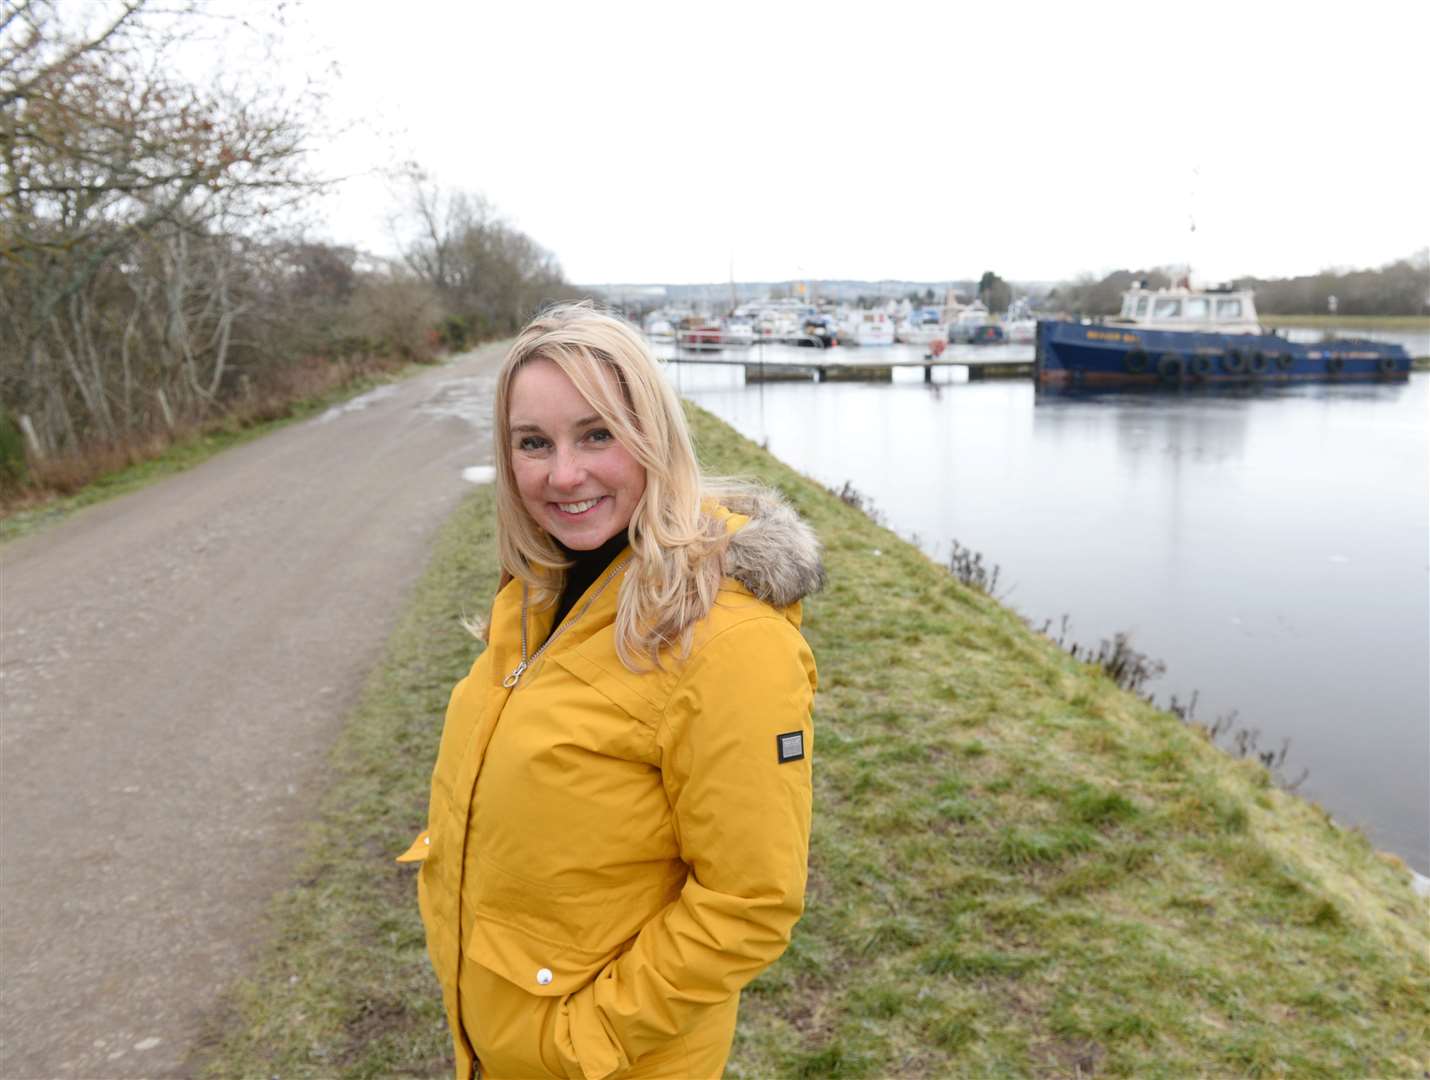 All systems go for new Inverness marina complex promising regeneration ...